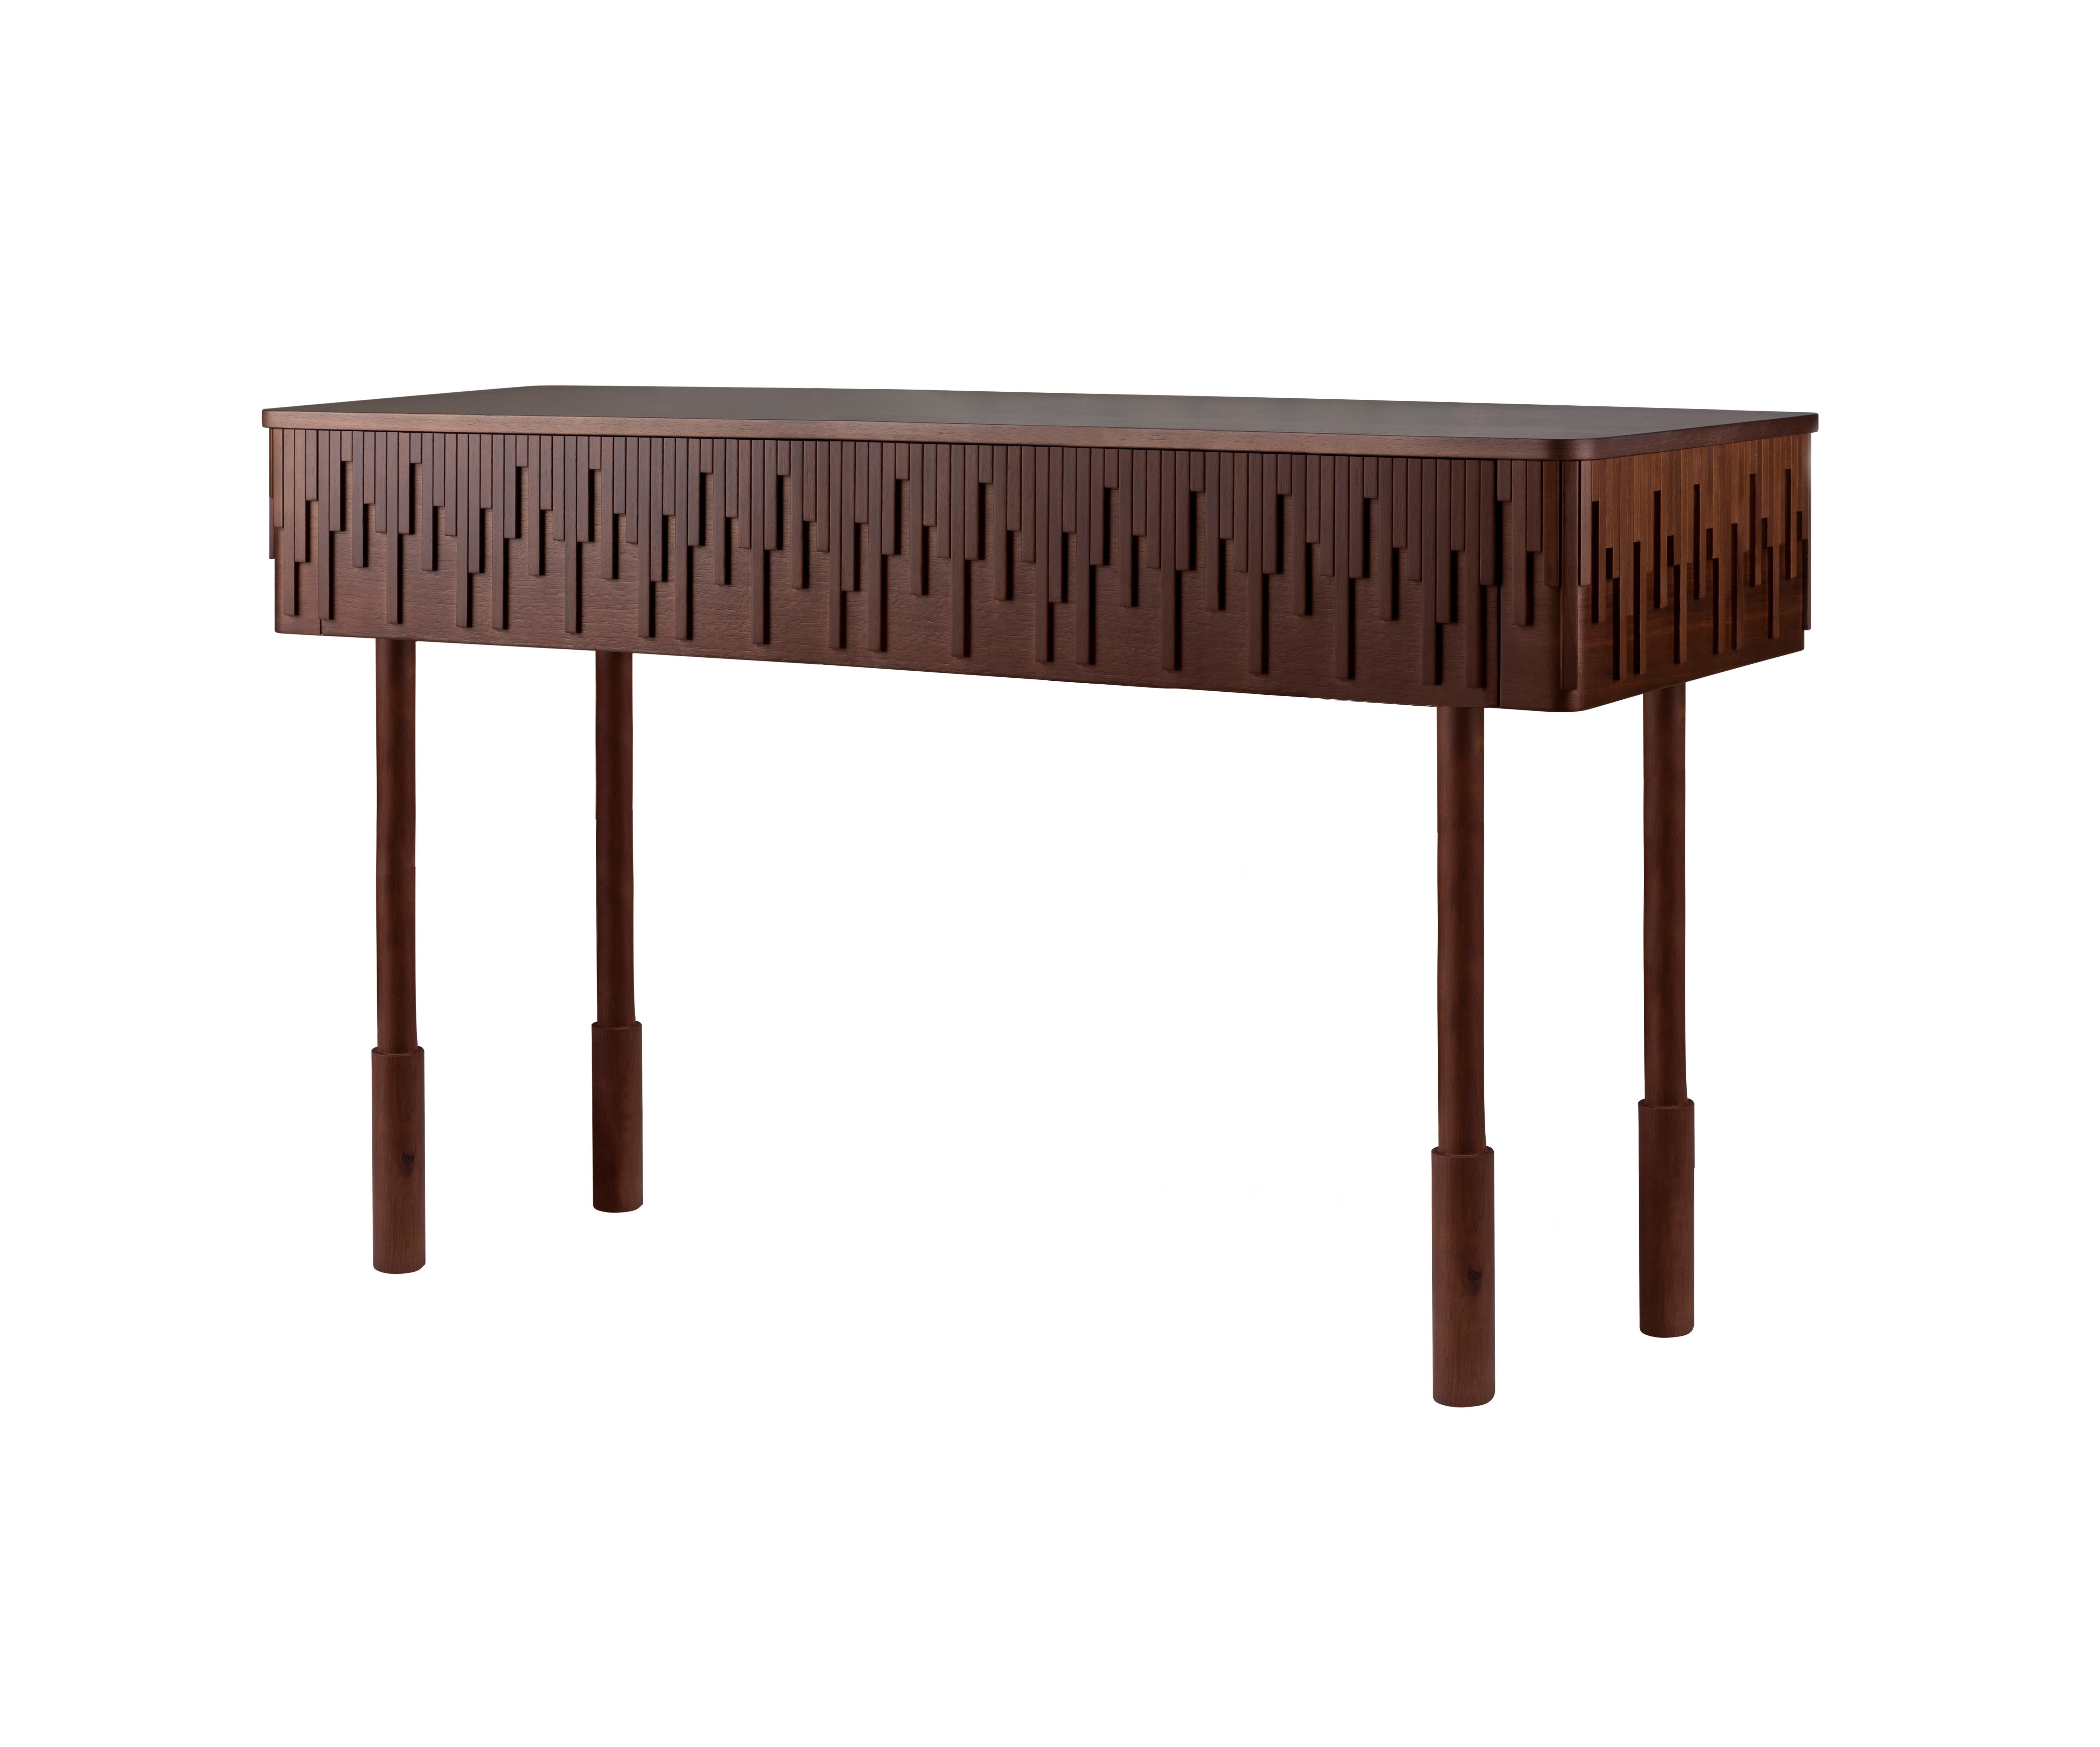 Inspired by the gentlemen's lifestyle of the time and giving it a modern touch, Wood Tailors Club designers conceived the Campbell Console. Handcrafted by some of the best Portuguese artisans in walnut wood, the console top is adorned with